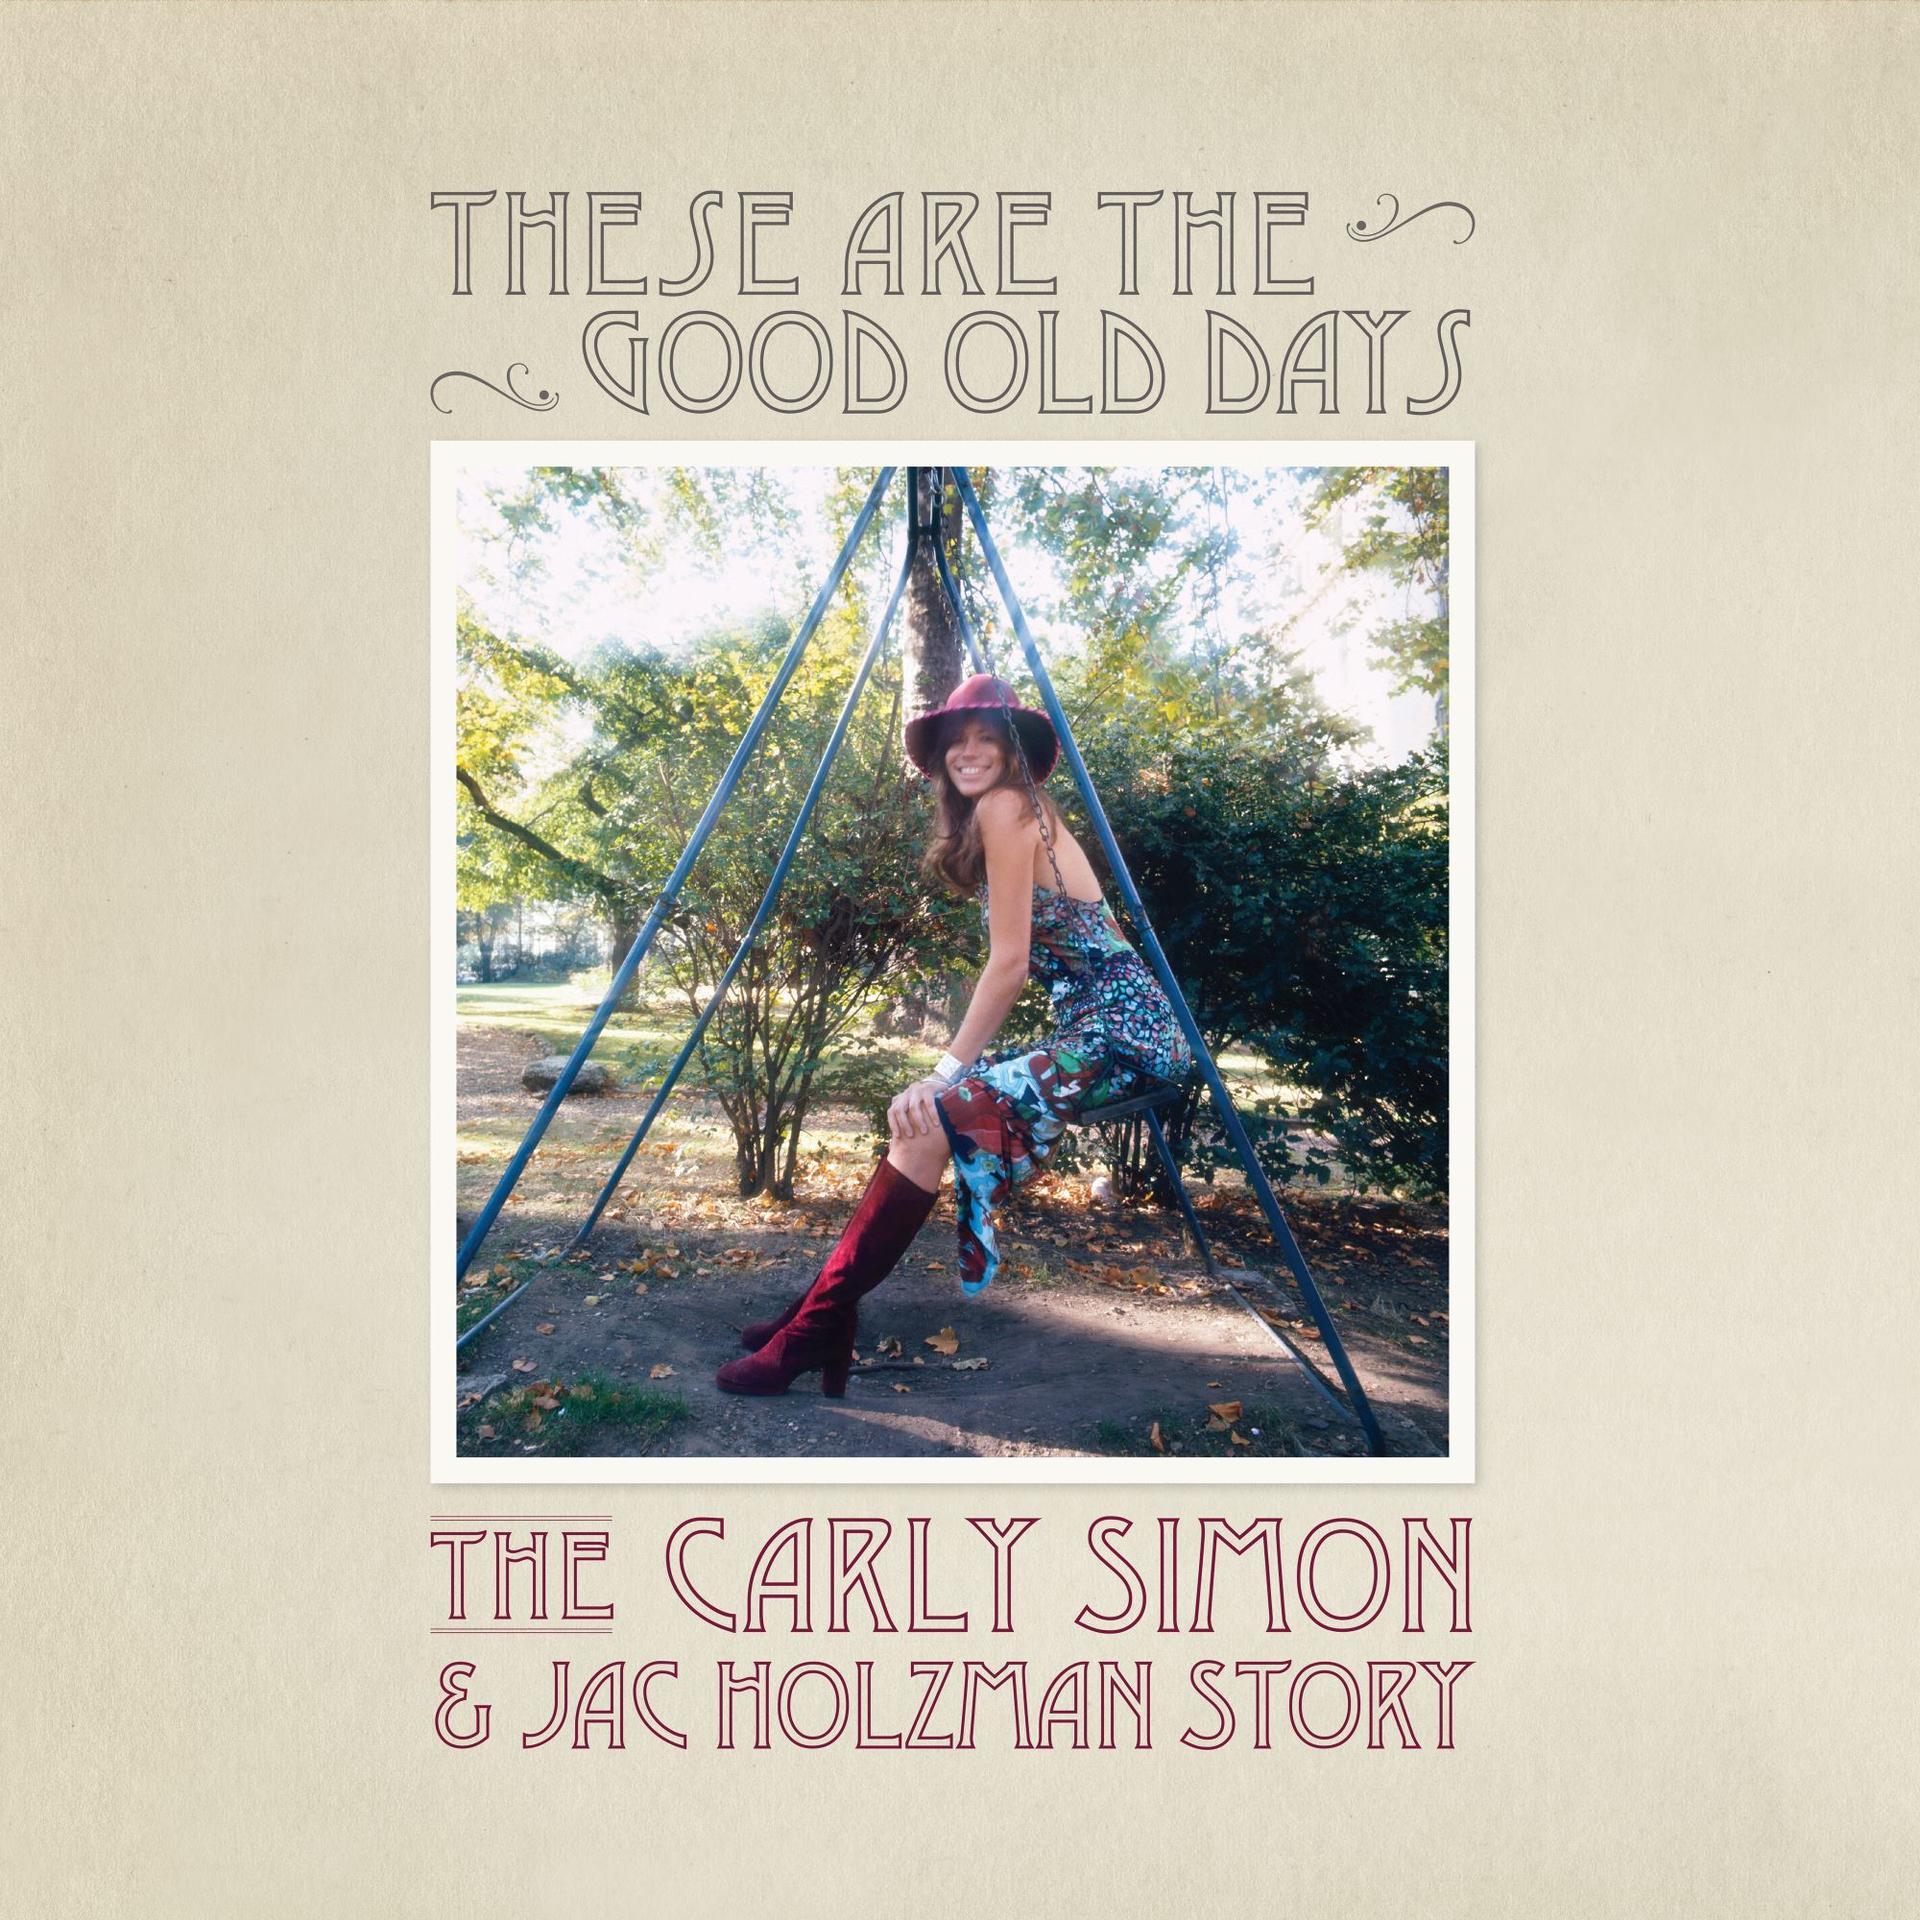 - Are Good The Days: - (CD) Carly Simon Old These